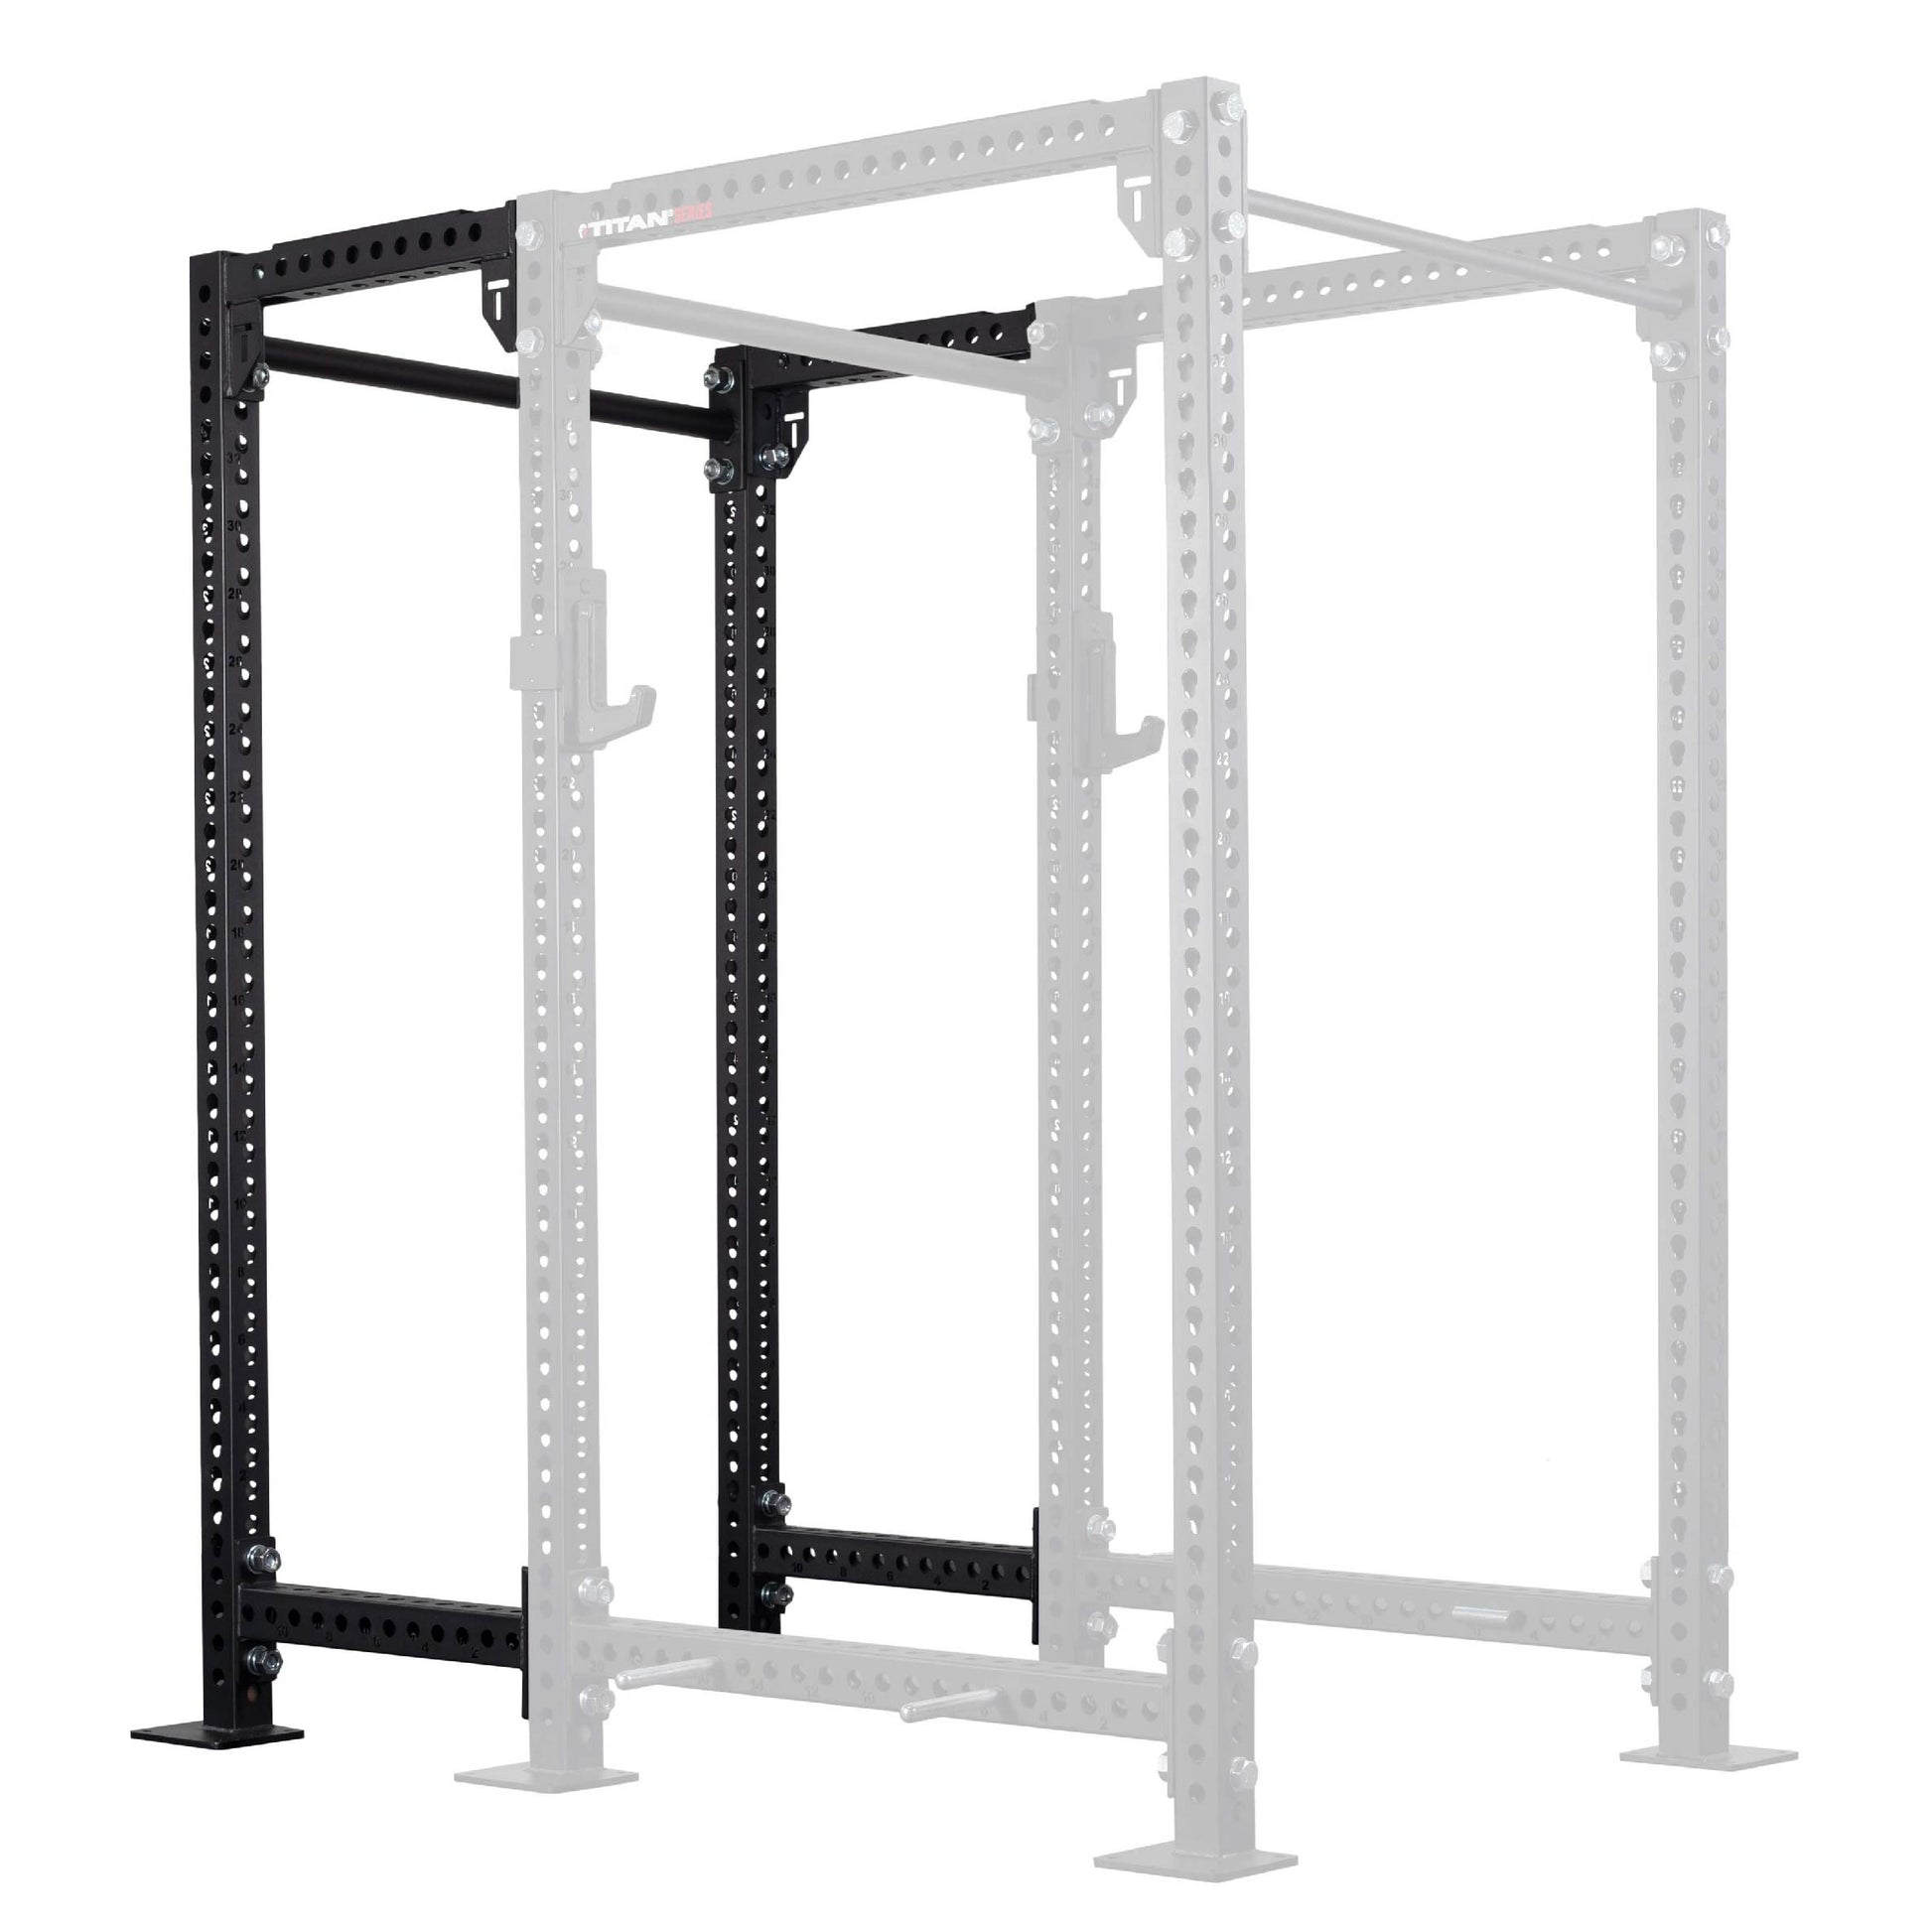 TITAN Series 24" Extension Kit - Extension Color: Black - Extension Height: 90" - Crossmember: 2" Fat Pull-Up Bar | Black / 90" / 2" Fat Pull-Up Bar